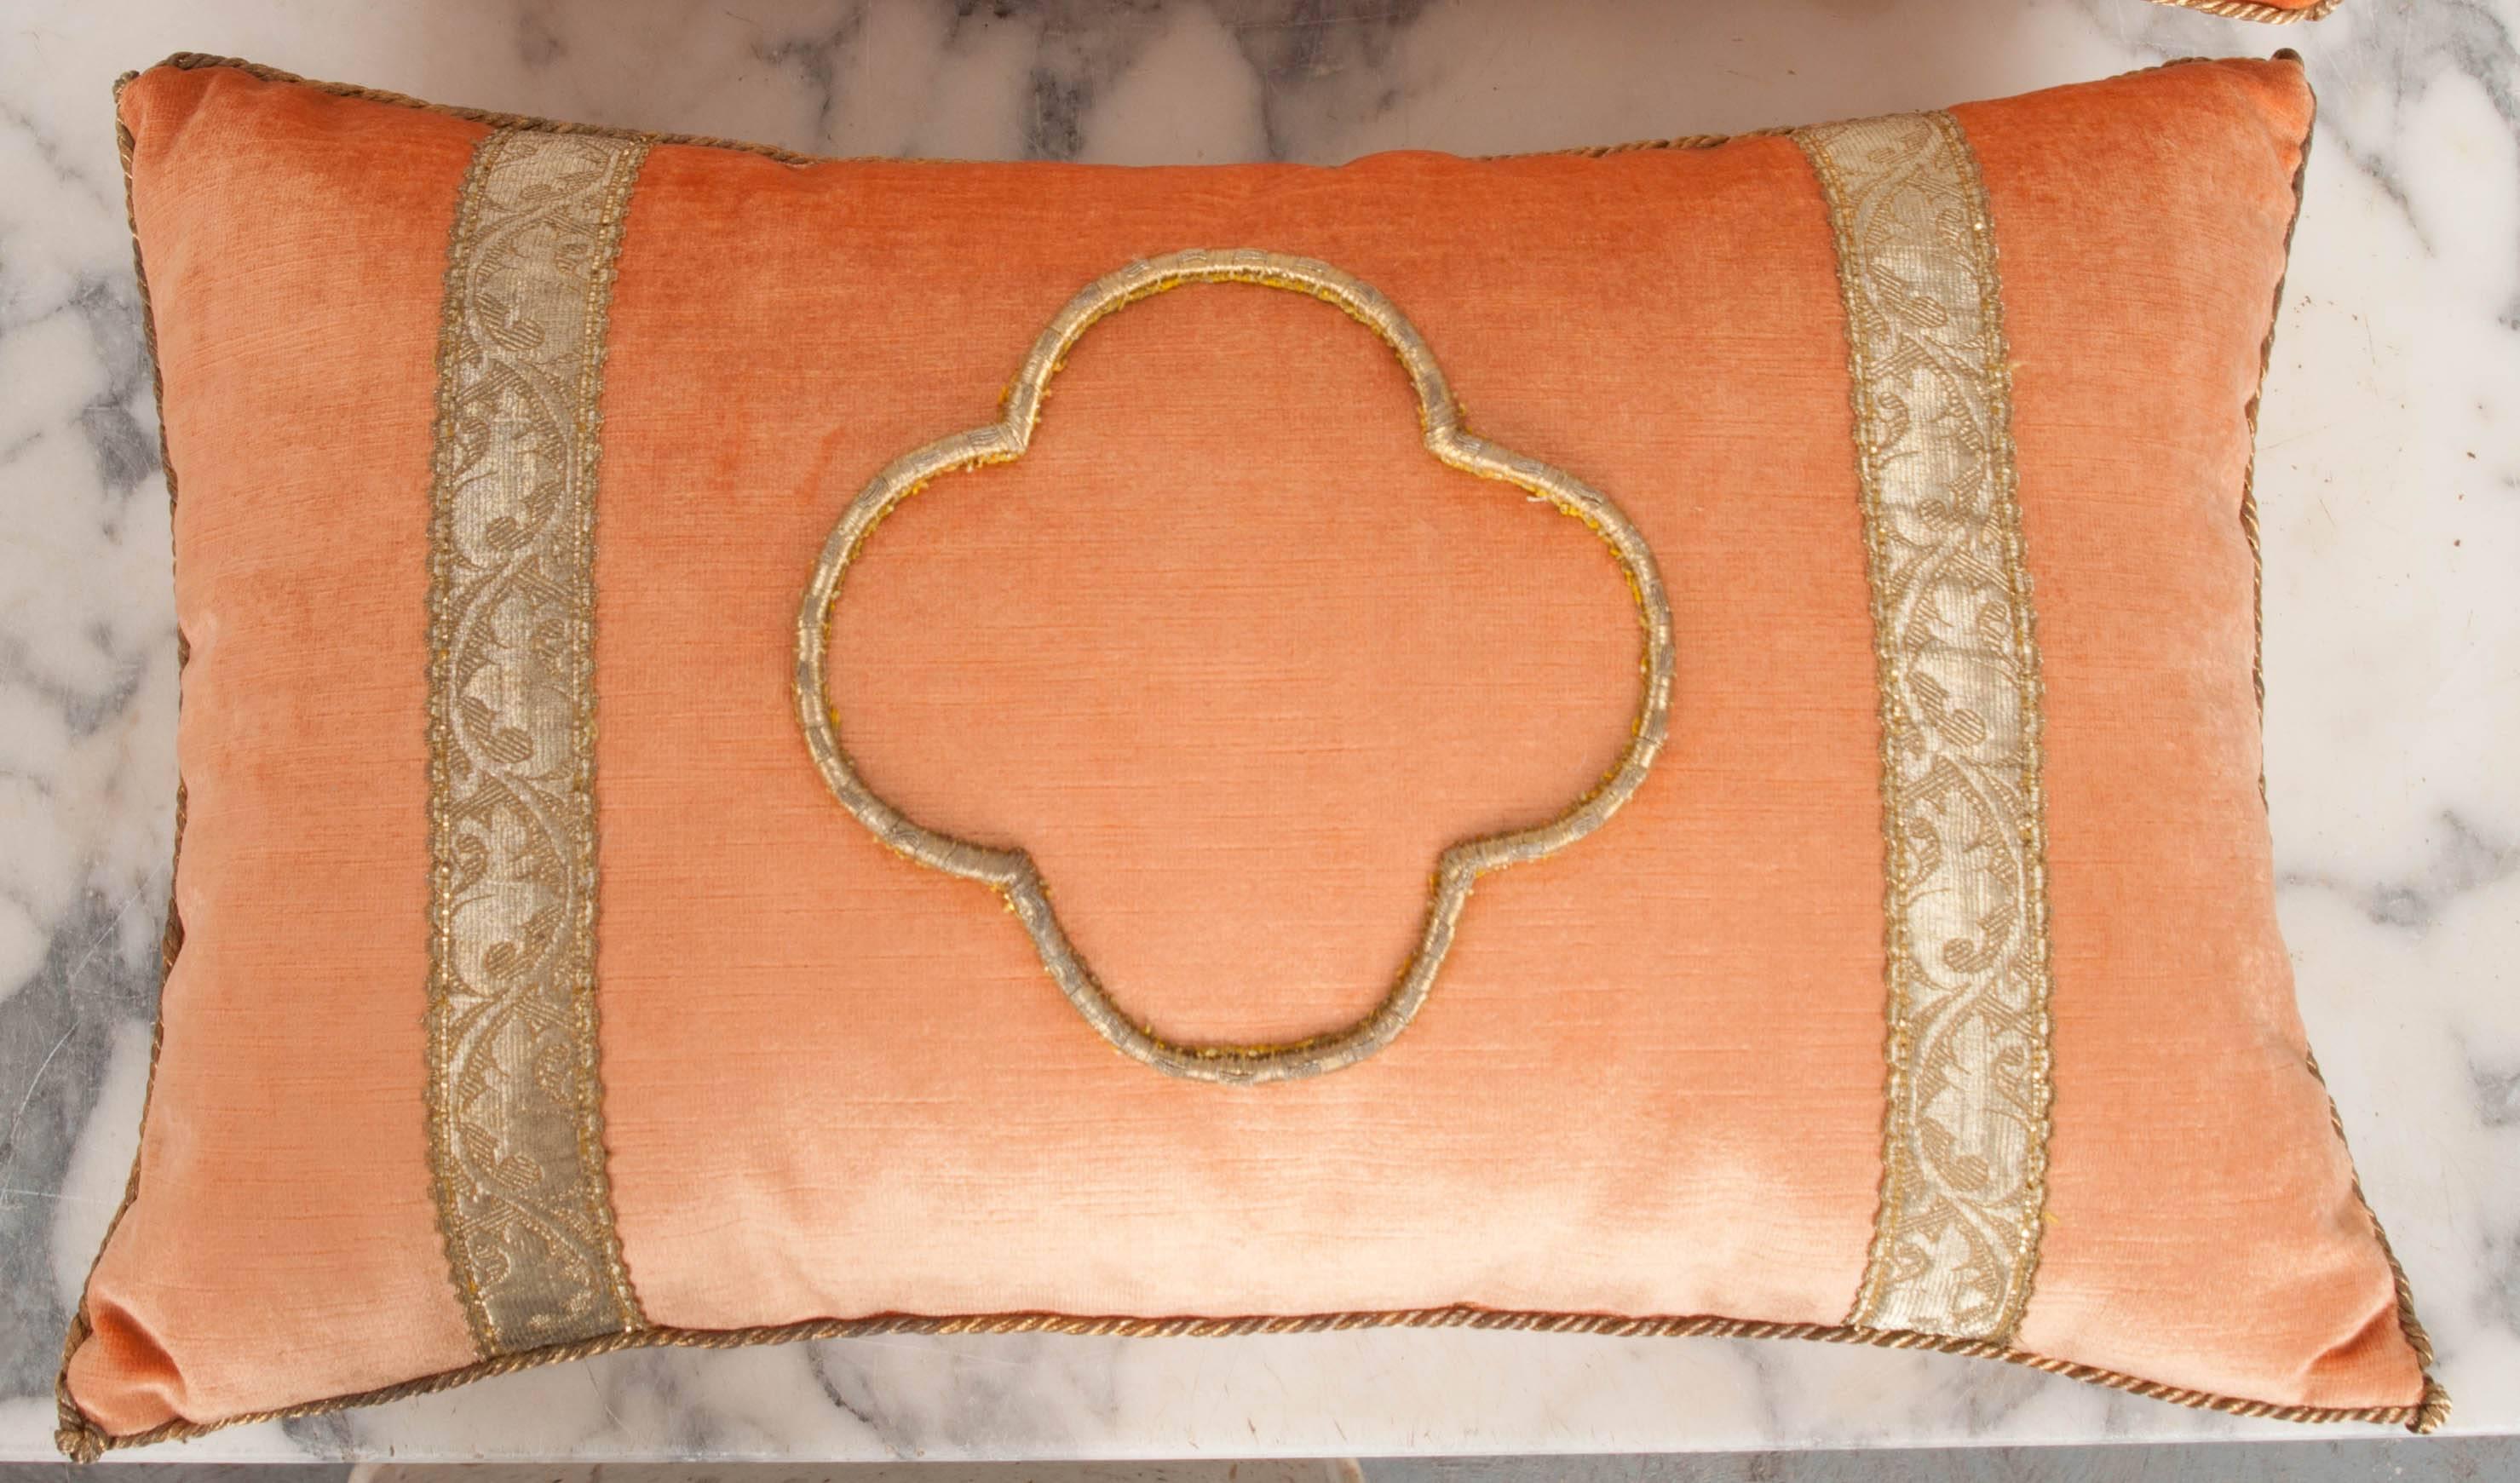 Antique European raised gold metallic embroidery of a quatrefoil bordered with antique gold metallic gallon on melon velvet. Hand-trimmed with vintage gold metallic cording knotted in the corners. Down filled. Available for individual purchase: